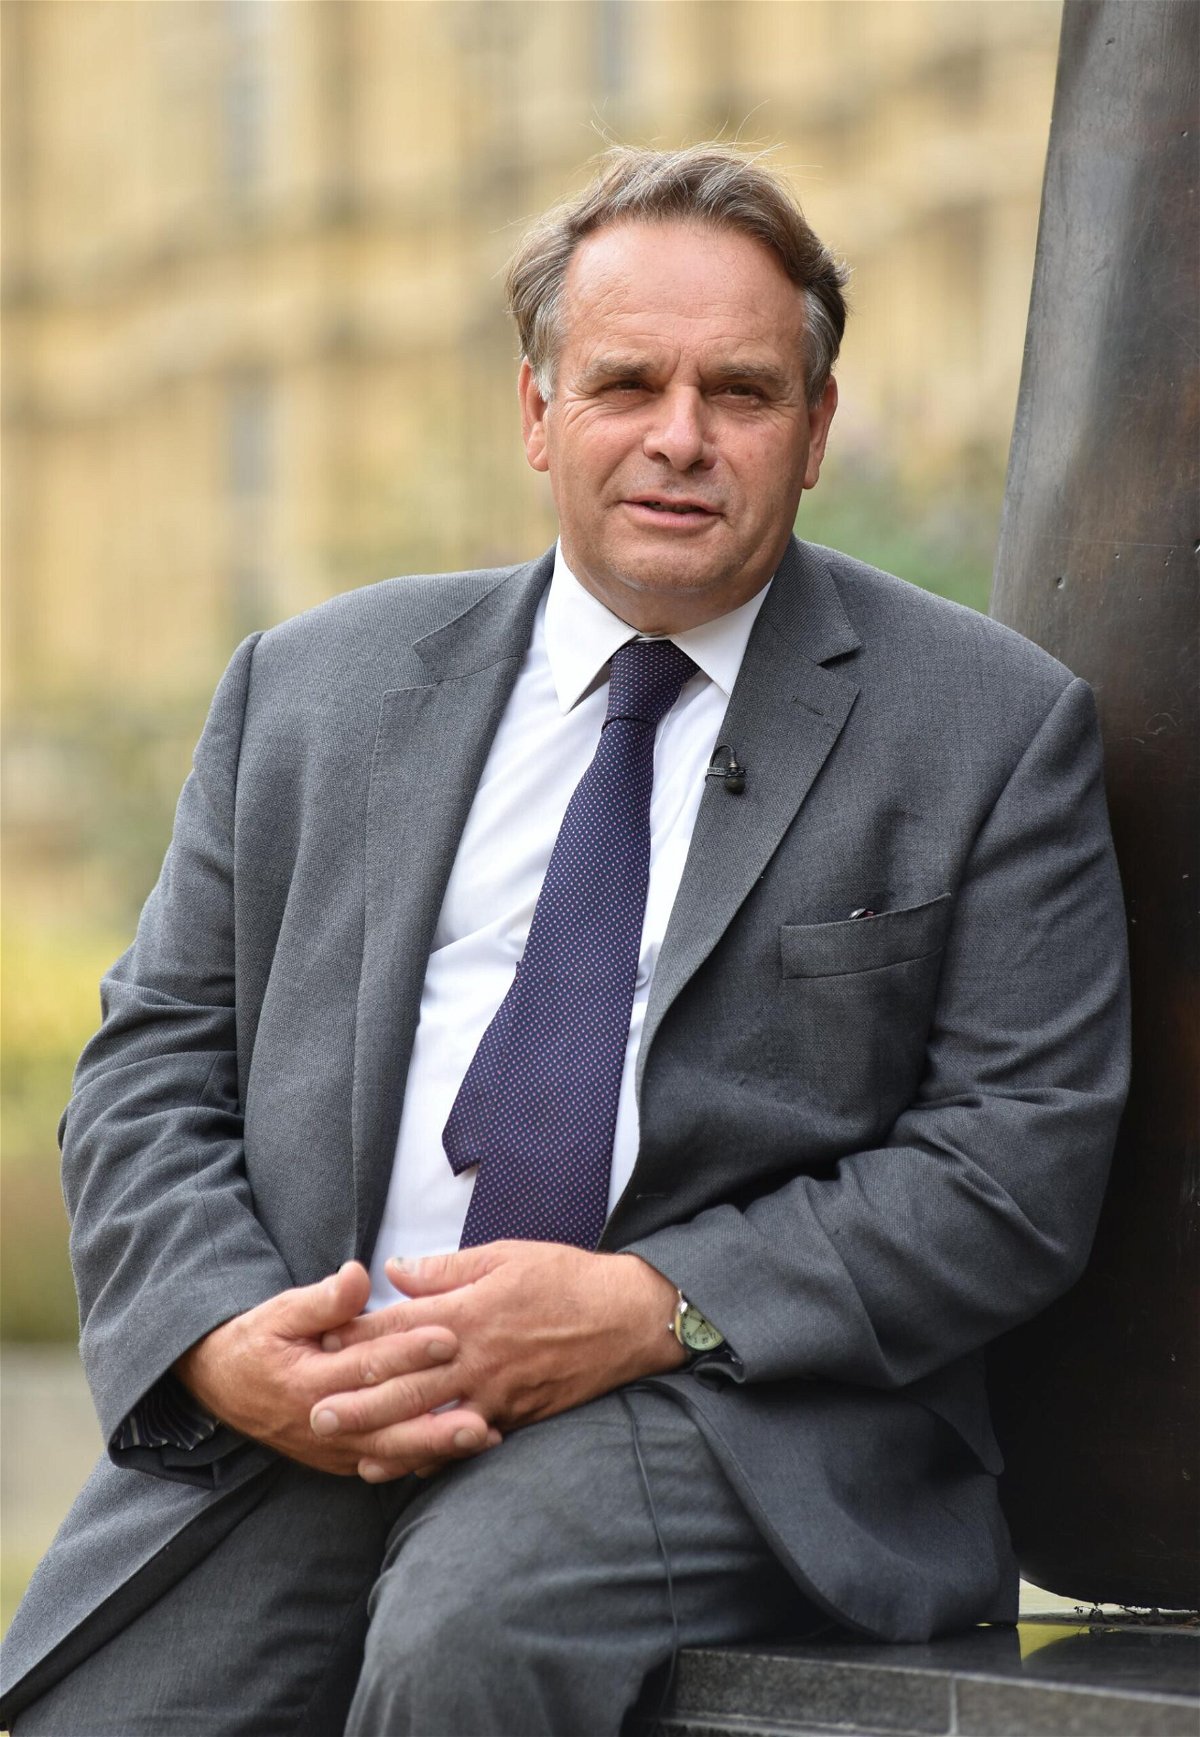 <i>John Keeble/Getty Images</i><br/>Neil Parish will resign as a member of parliament after admitting watching porn in the Commons chamber.